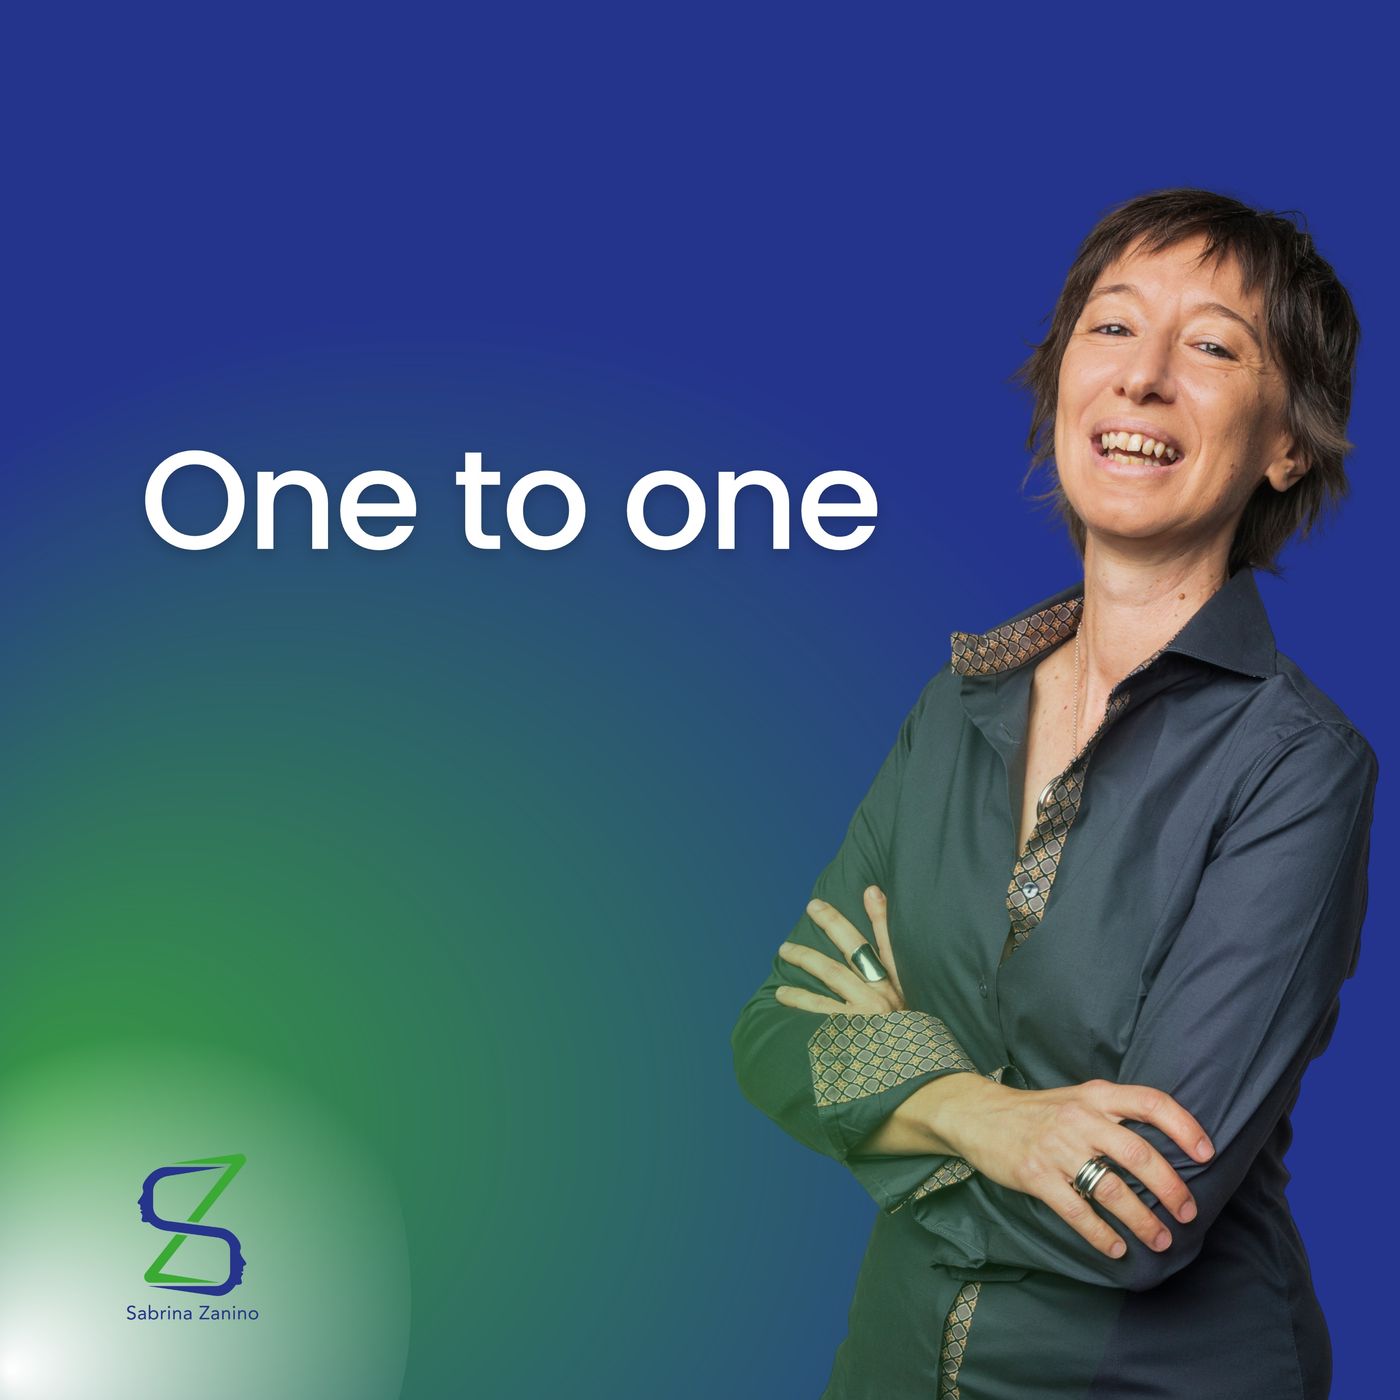 093 - One to one